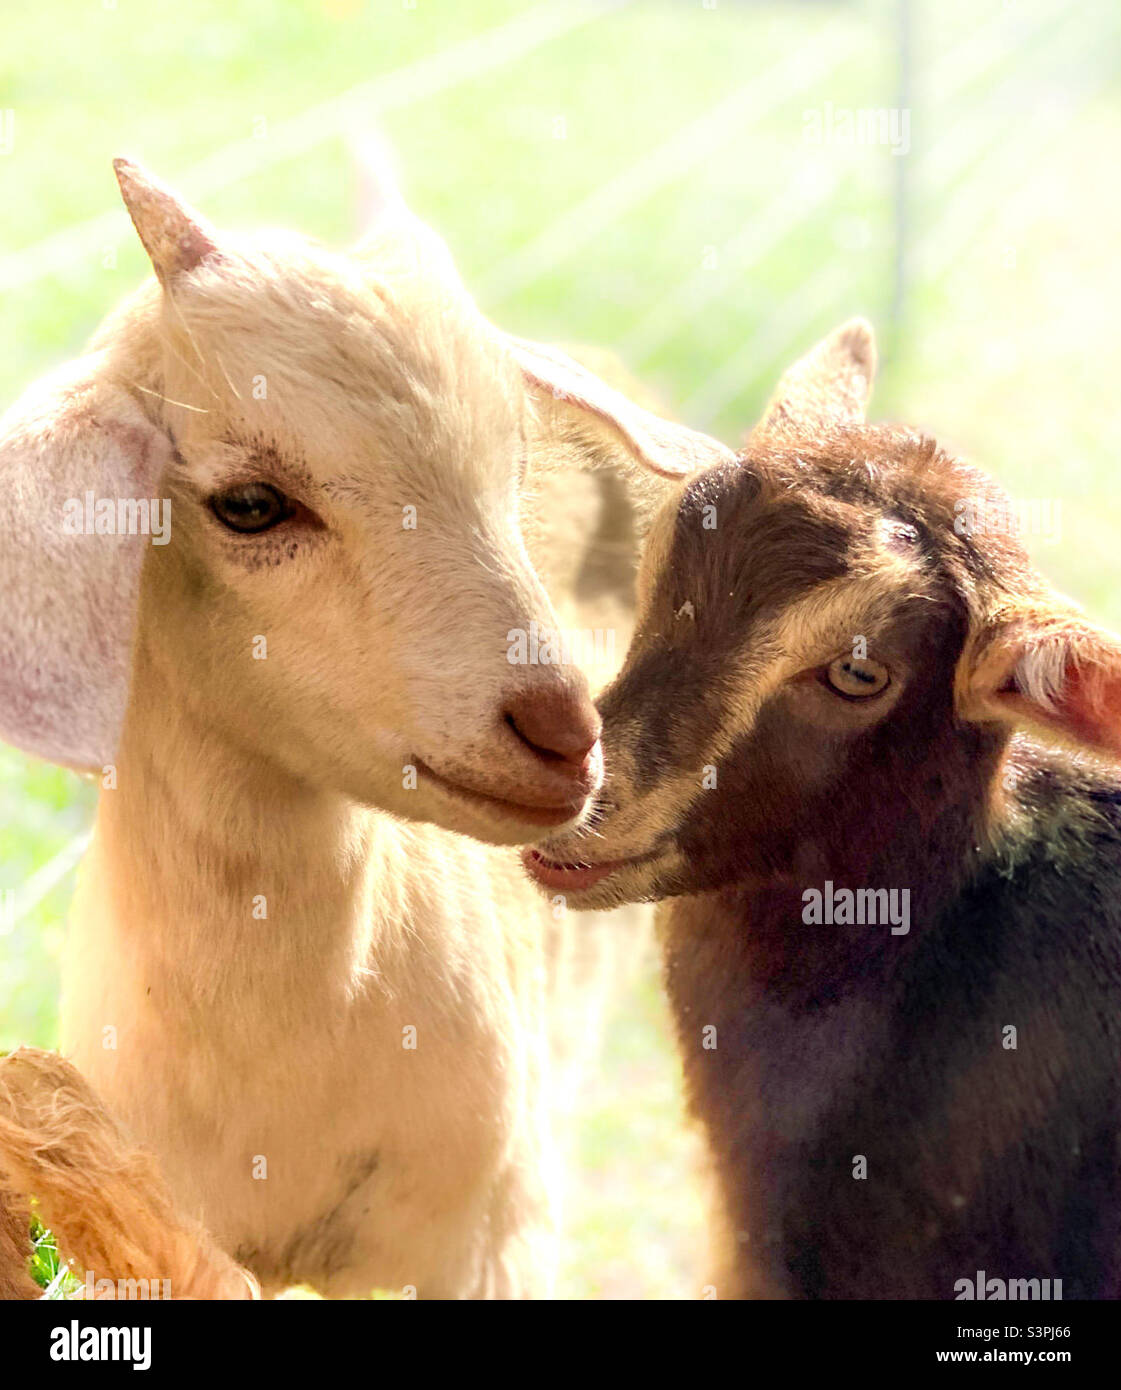 A pair of young goats Stock Photo